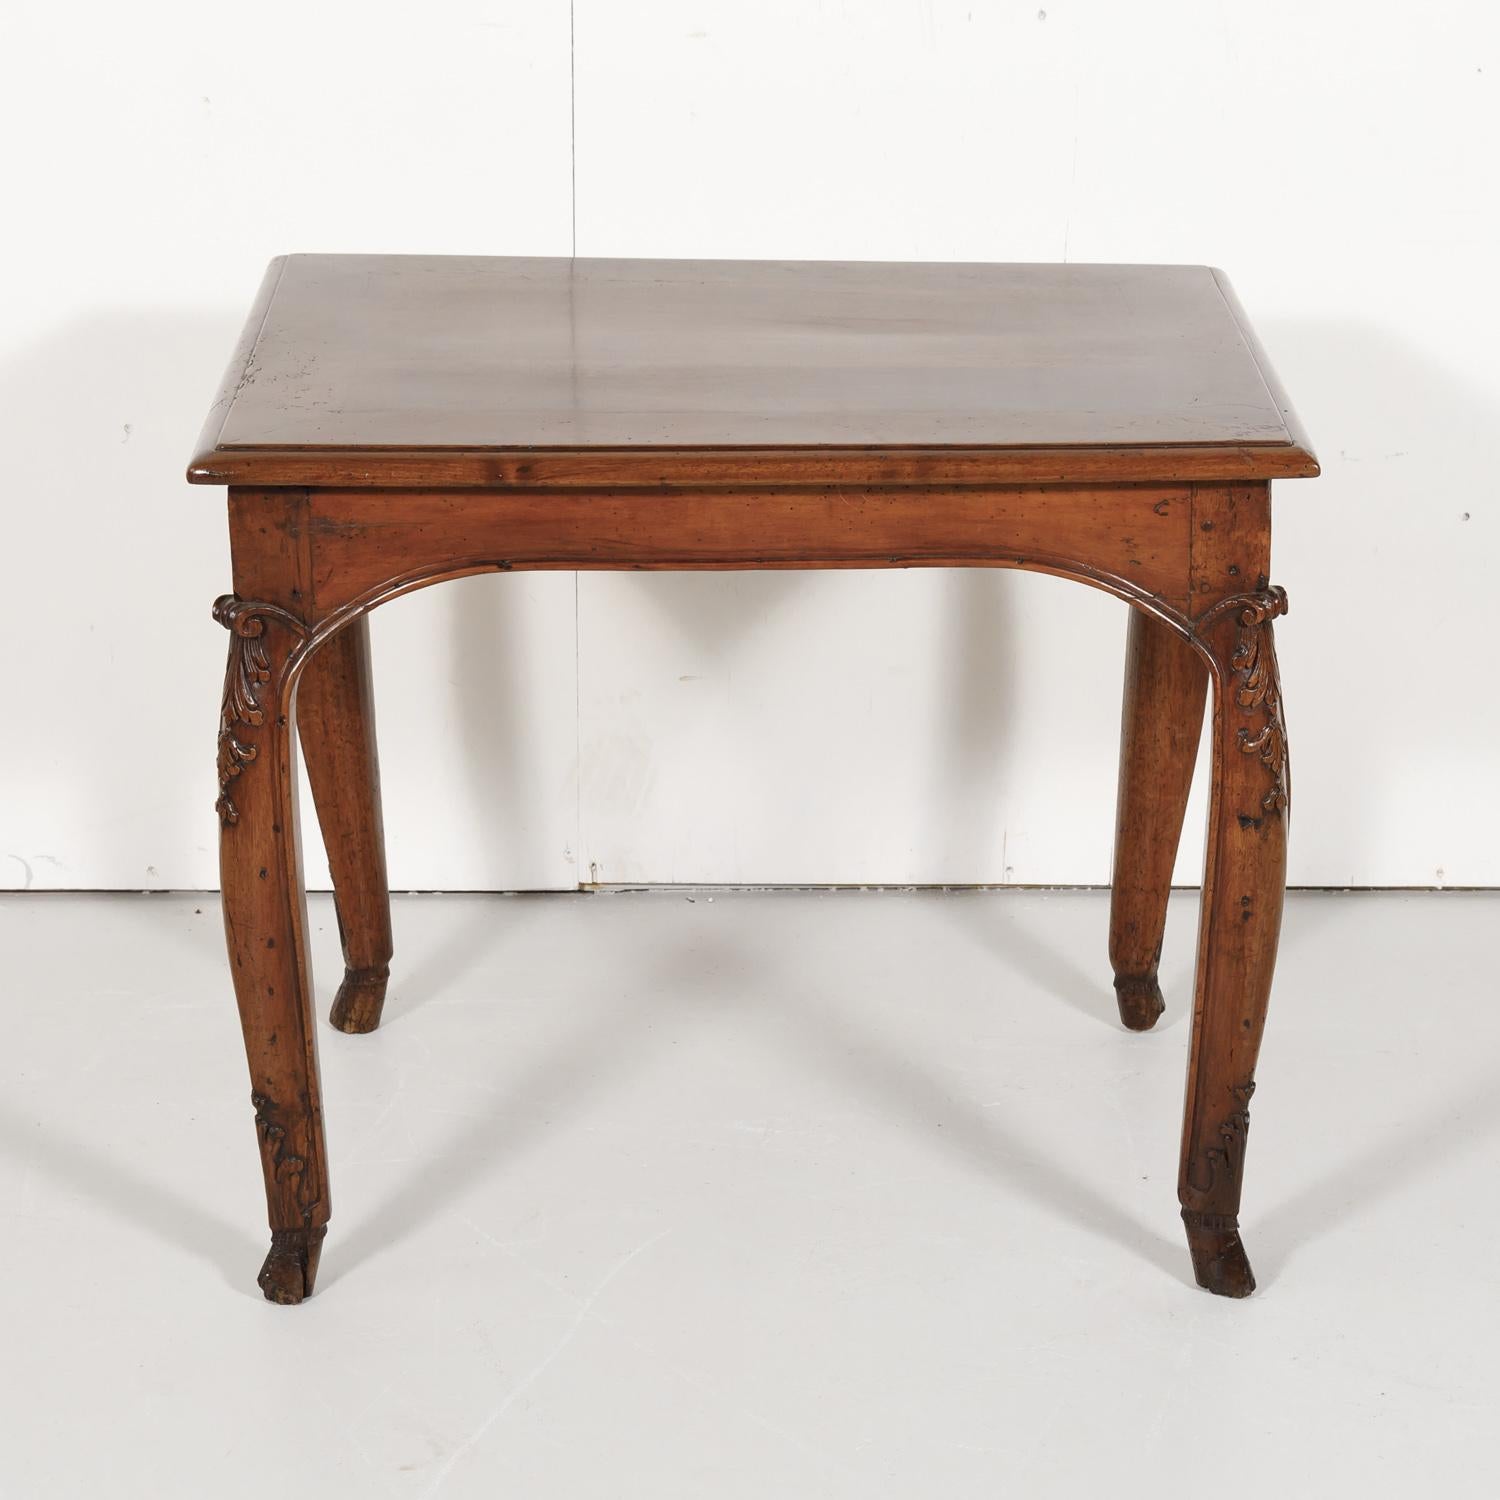 Lovely 18th century French country Louis XV period side table handcrafted of solid walnut in Lyon, circa 1740s, having a moulded top above a curved frieze. Raised on gently curving cabriole legs that have beautifully carved acanthus leaves at the